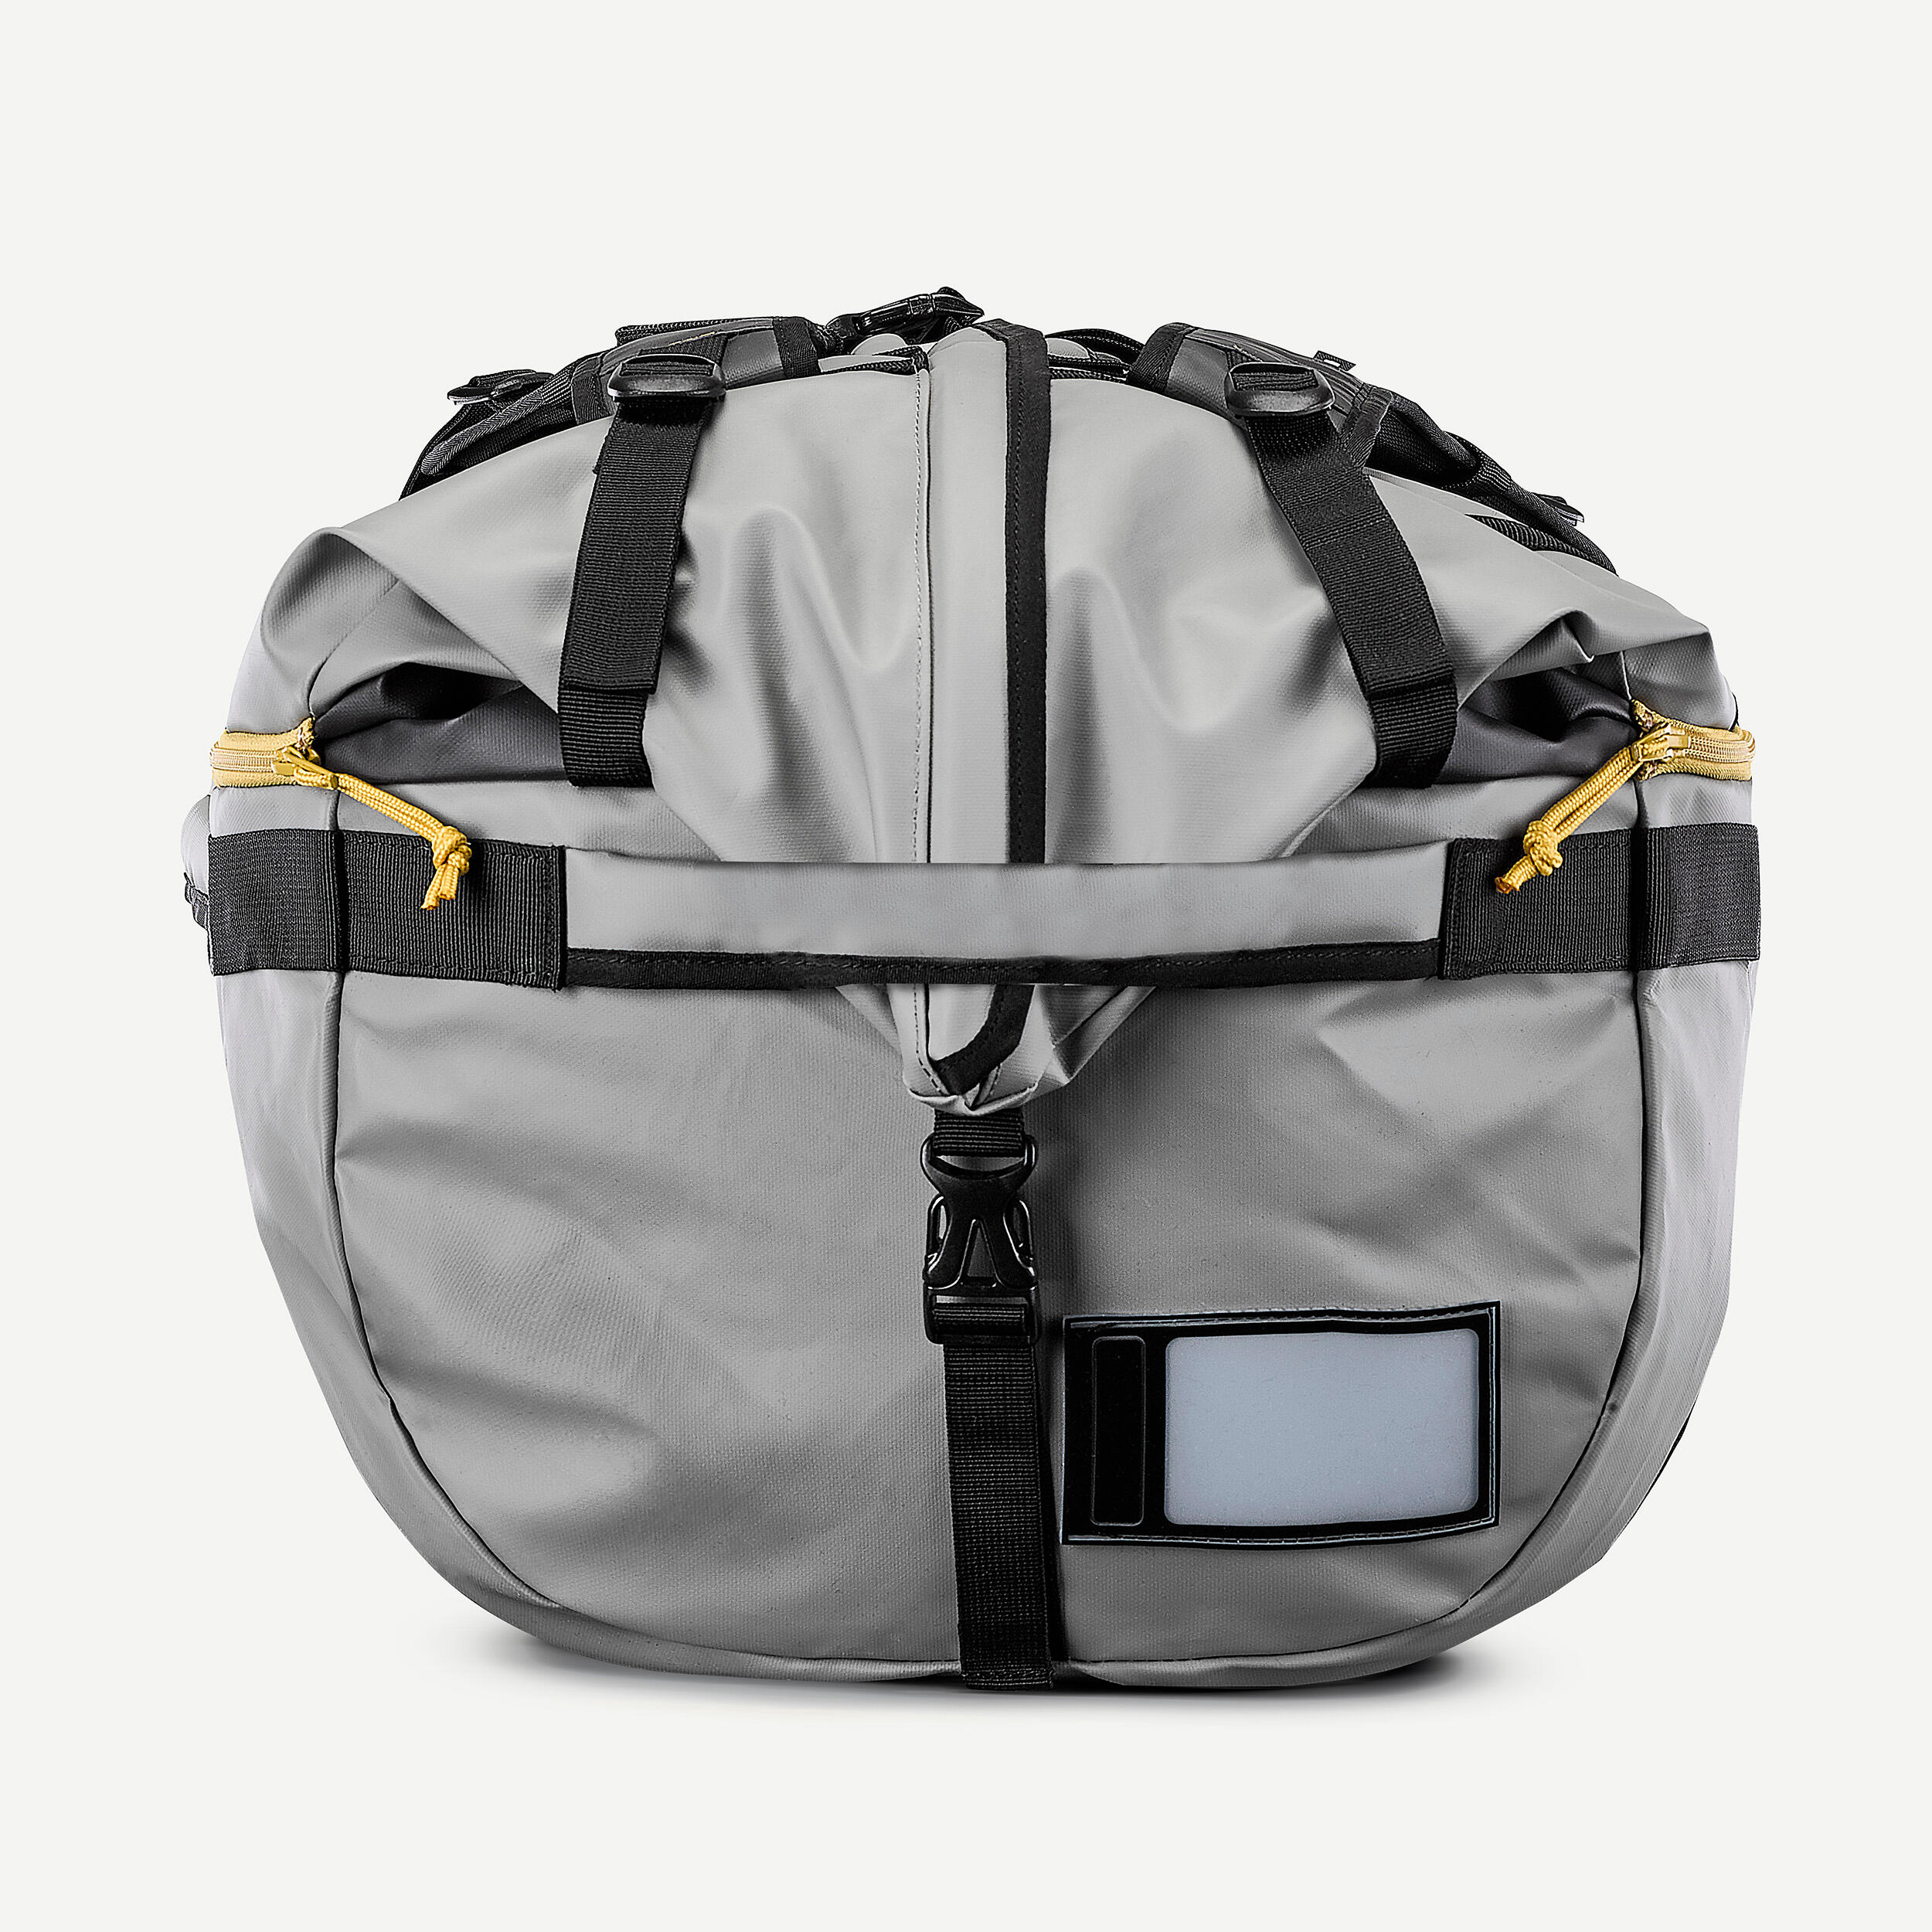 Buy Duffle Bag Extend 80 To 120 Litre Yellow Online